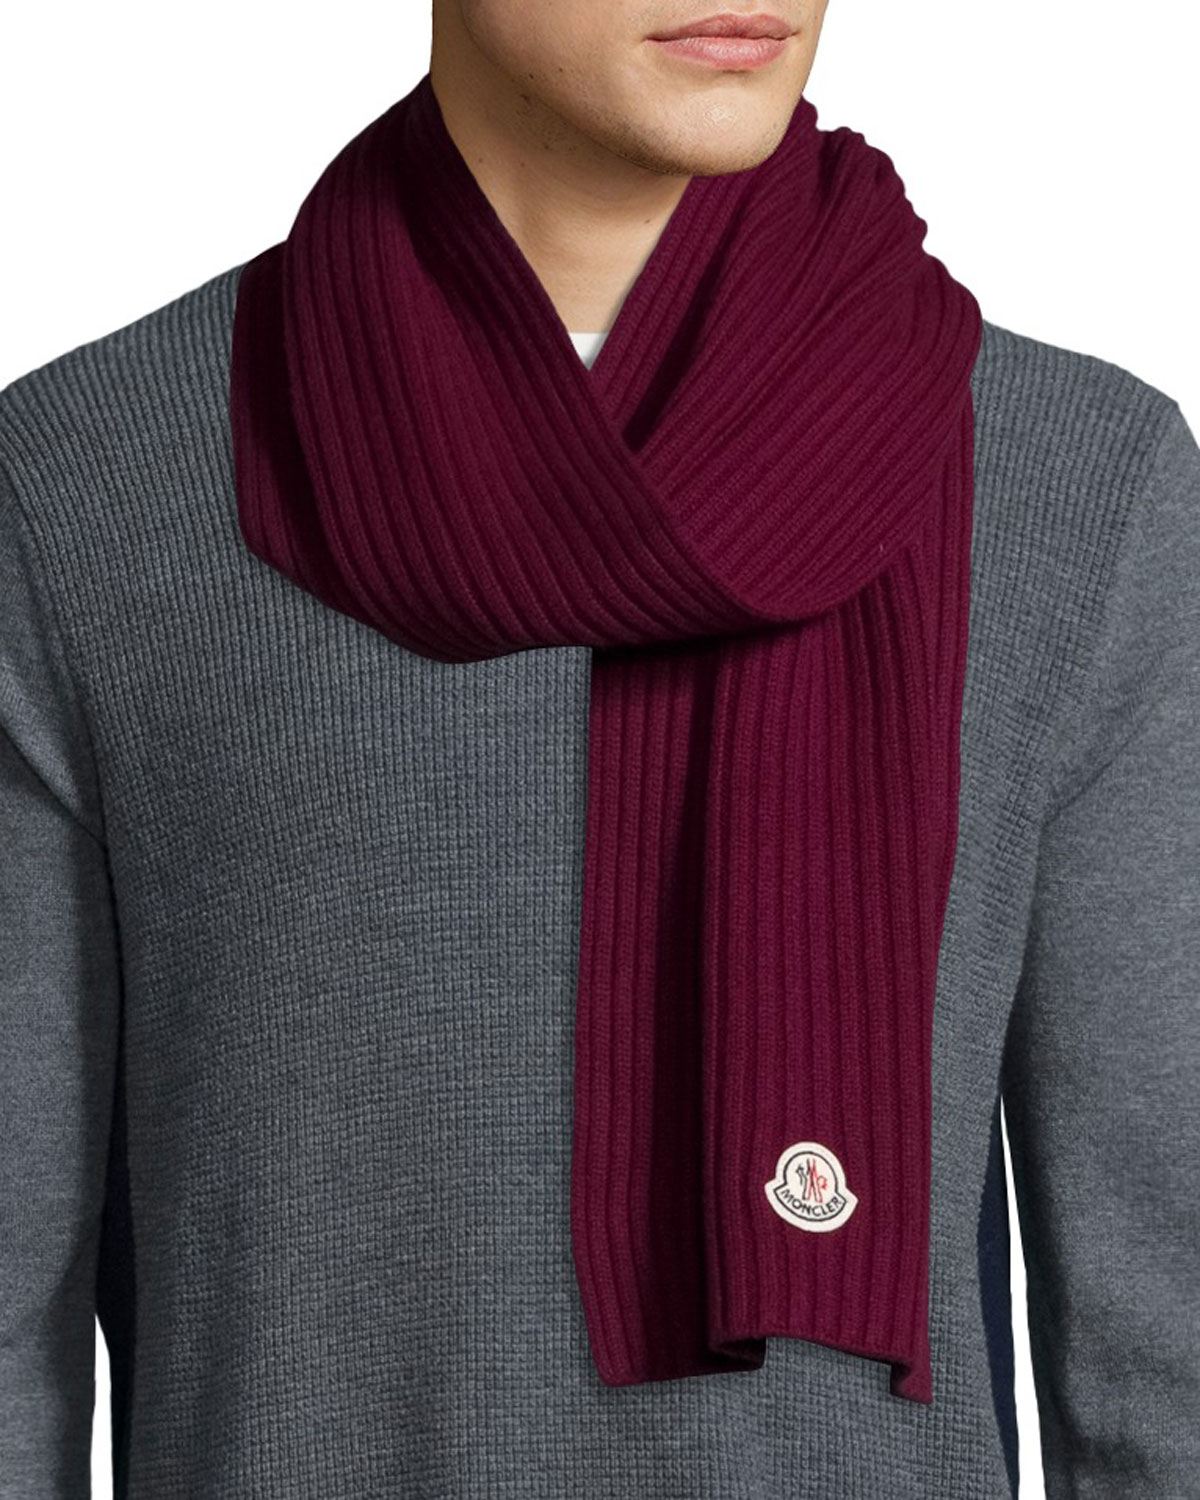 Lyst - Moncler Men's Cashmere Ribbed Scarf in Purple for Men